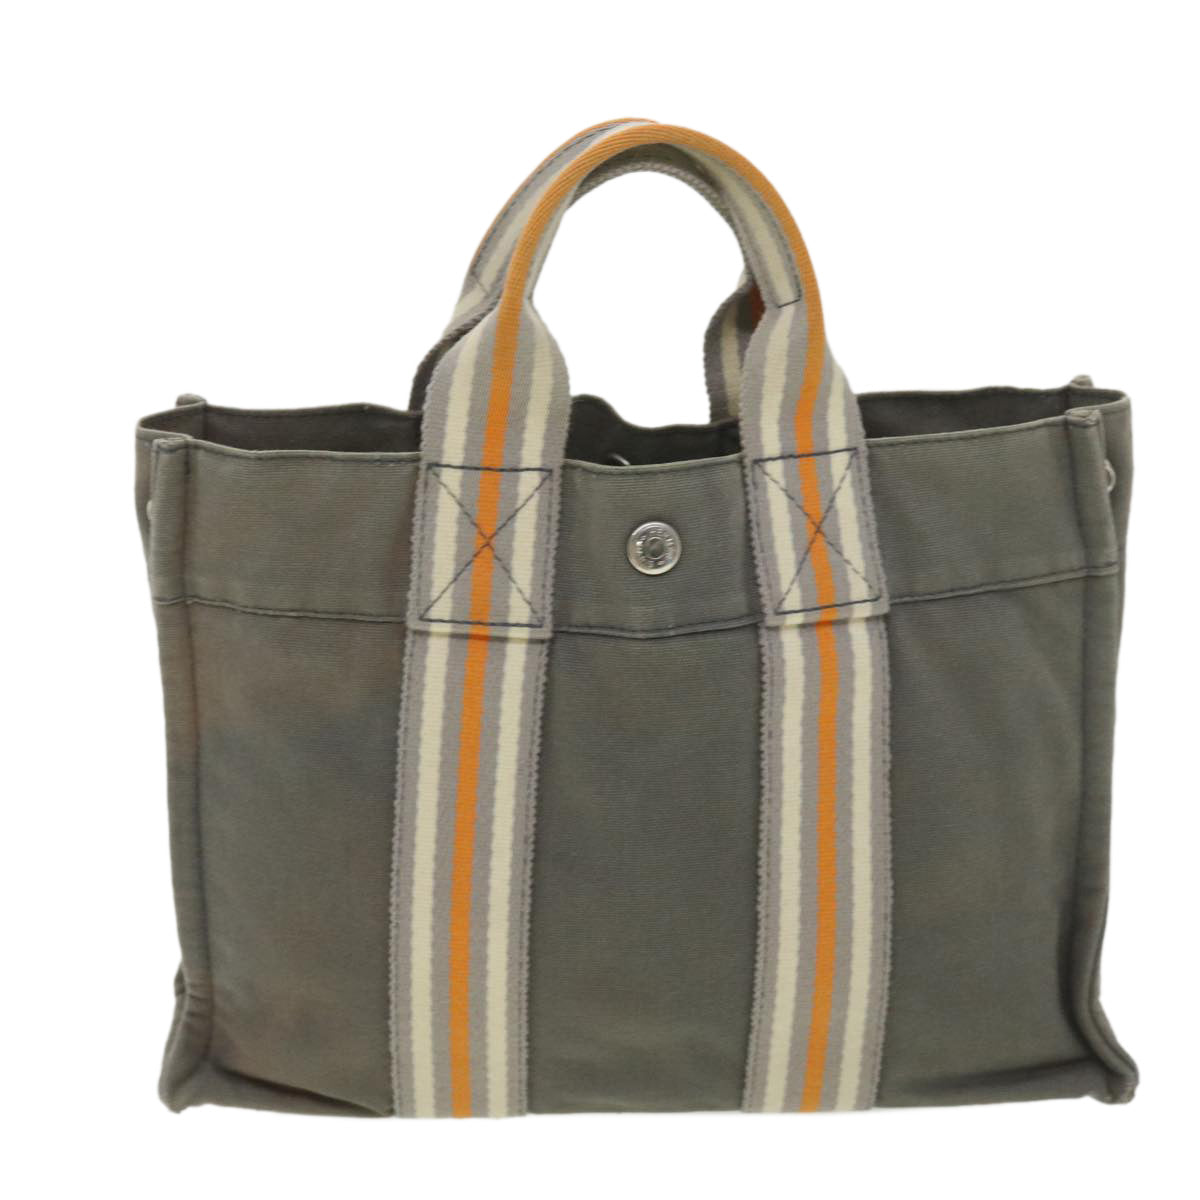 HERMES Her Line PM Hand Bag Canvas Gray Auth bs4422 - 0